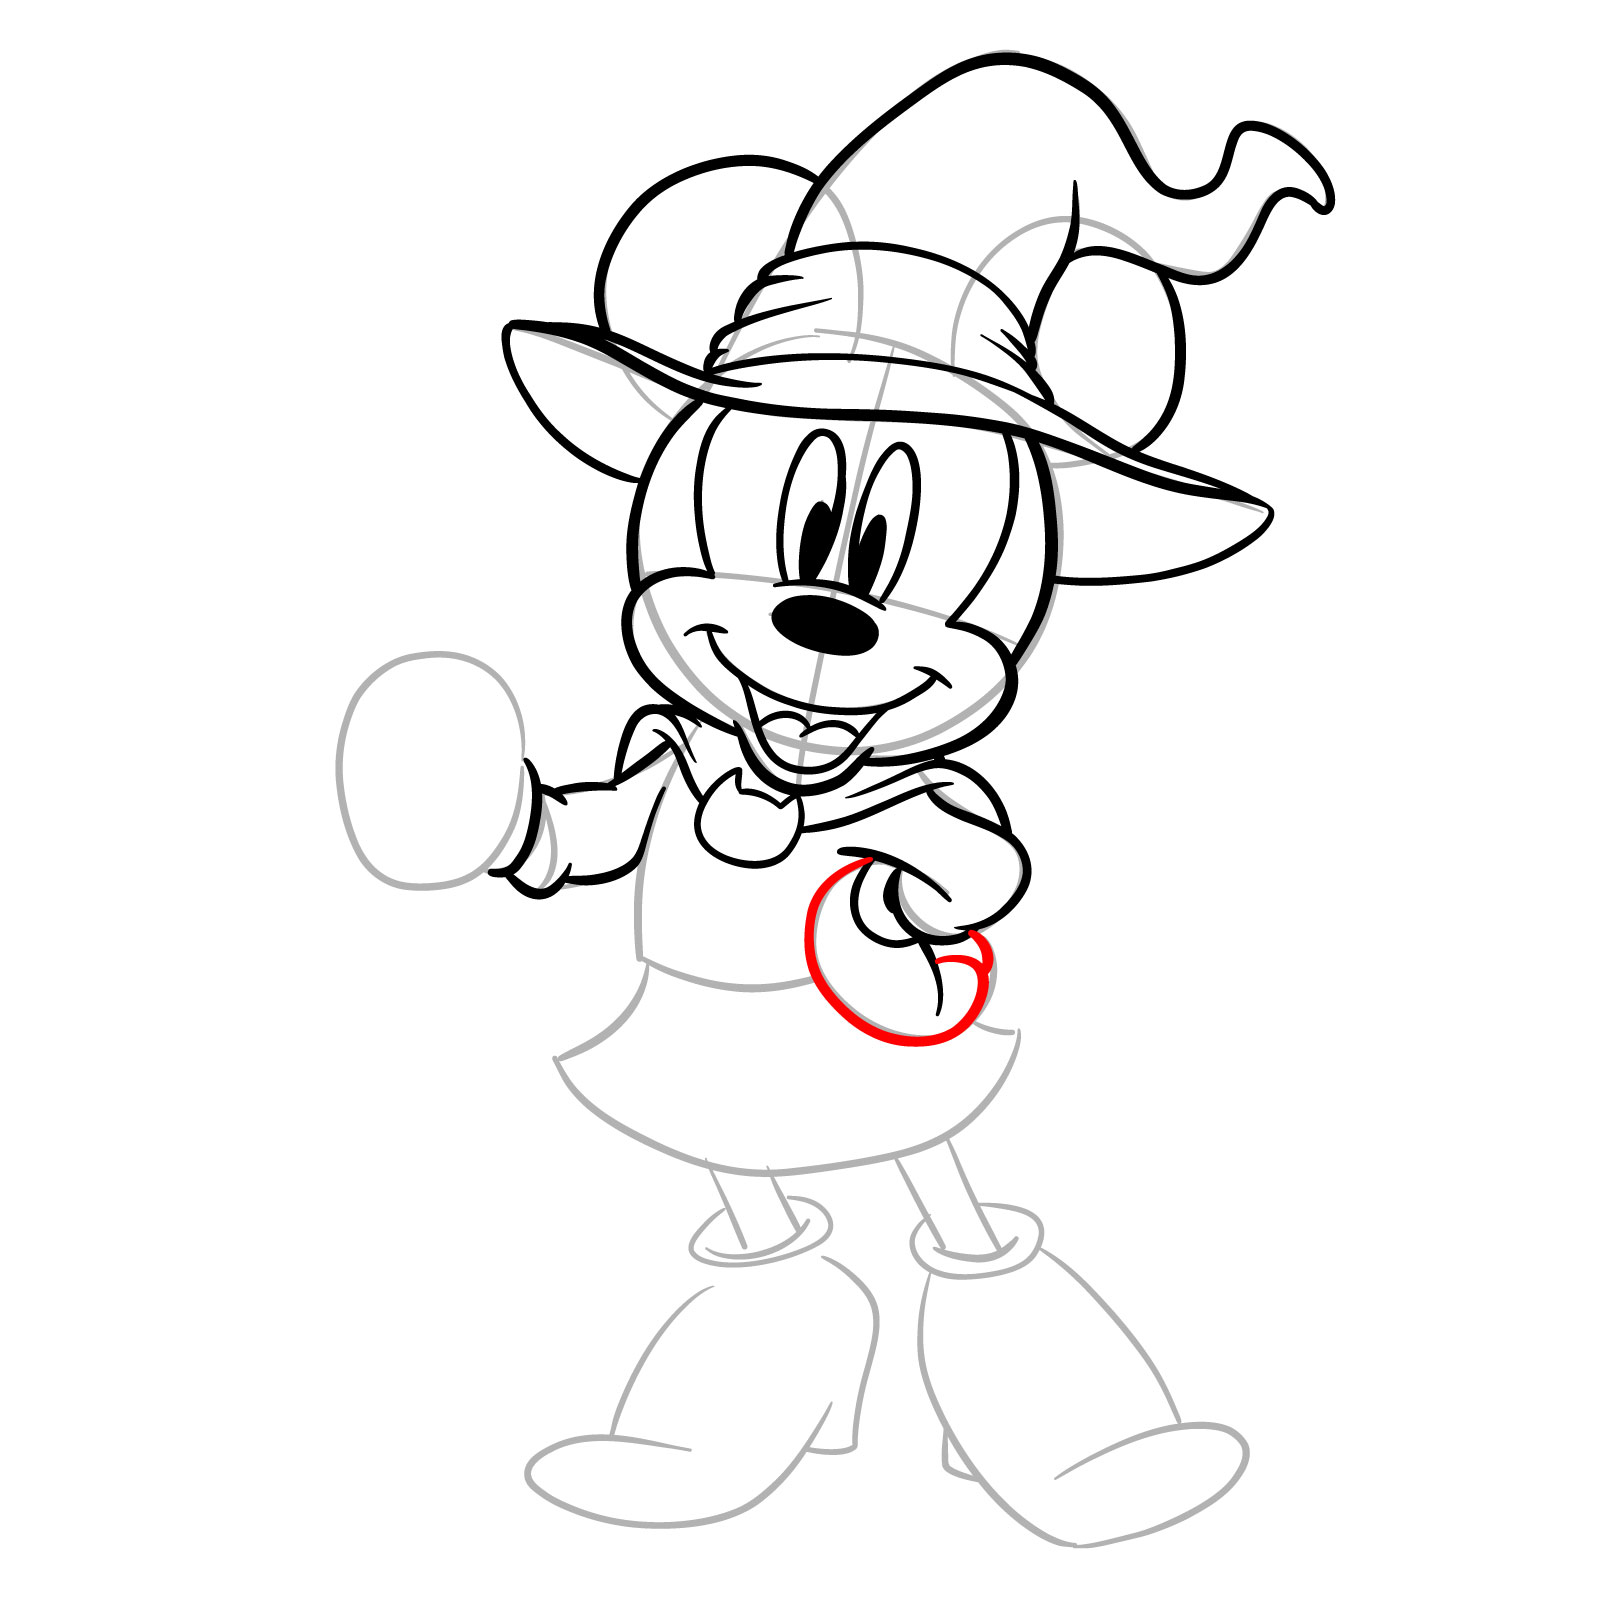 How to draw Halloween Minnie Mouse as a witch - step 18